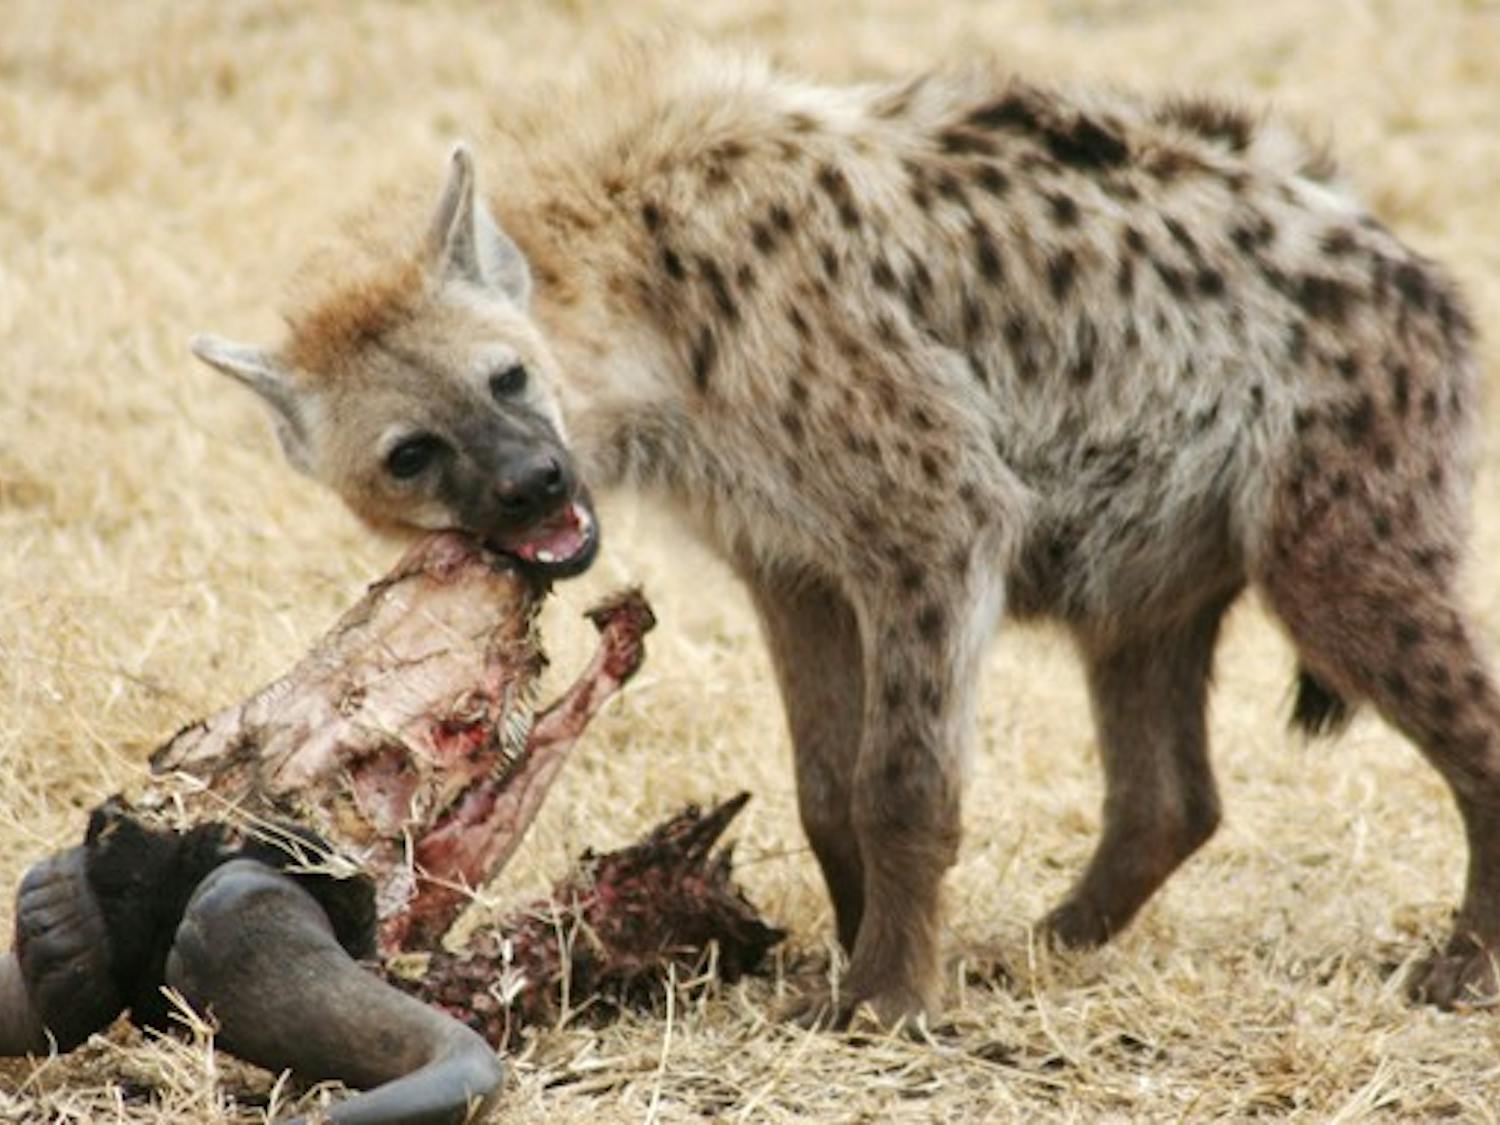 Duke researchers found that spotted hyenas possess complex cooperative behavior that lead them to hunt in groups. In a rope pulling experiment, hyenas were able to work together like primates in order to obtain food.